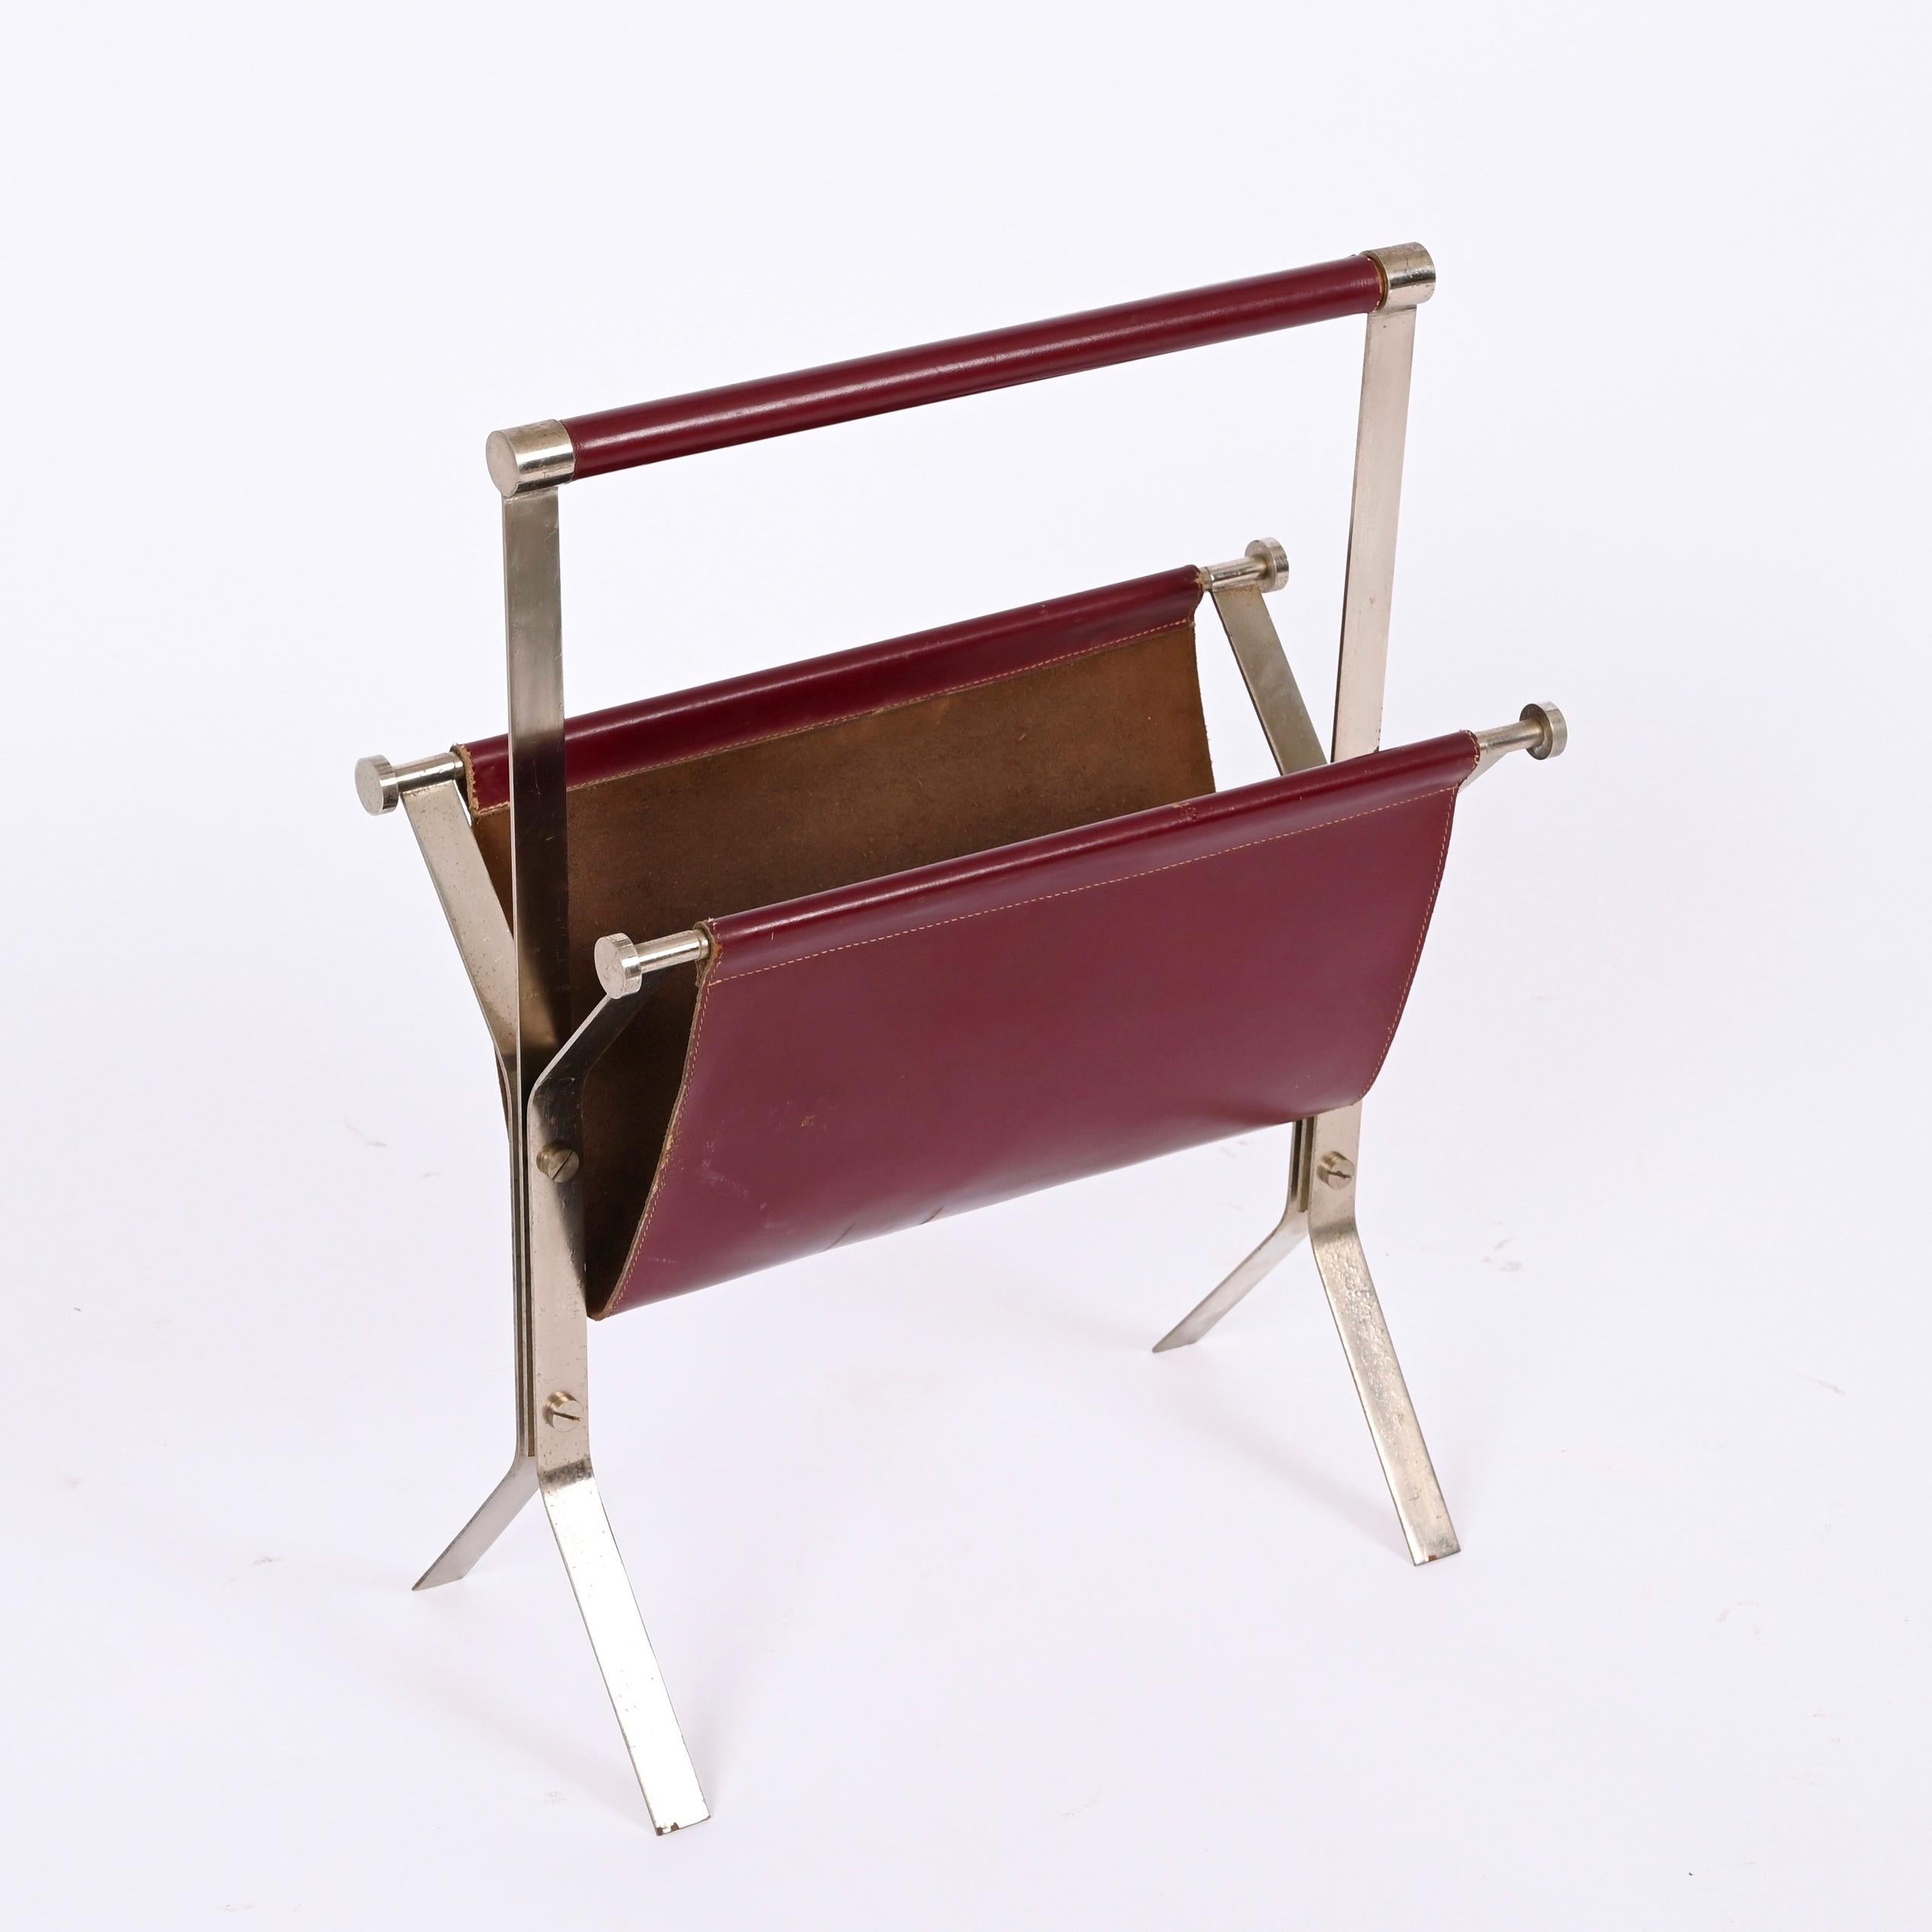 Italian Alessandro Albrizzi Midcentury Chromed Steel and Red Leather Magazine Rack 1970s For Sale